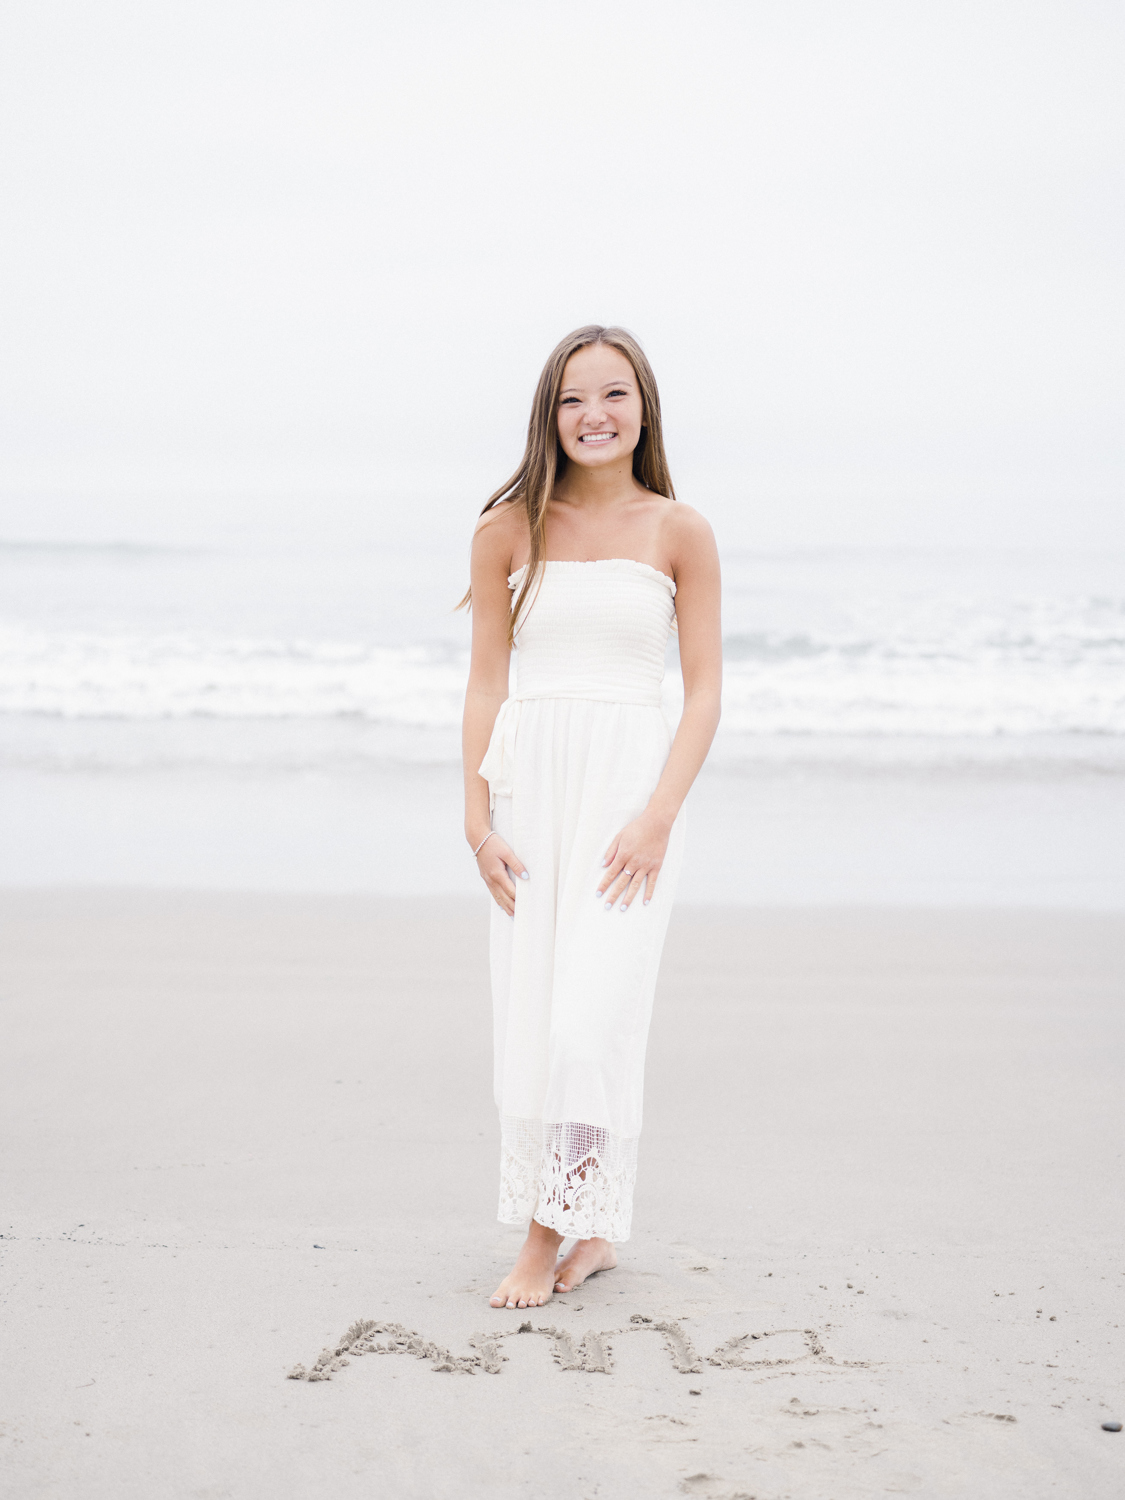 Girl in white standing on the beach with her name written in the sand at her feet